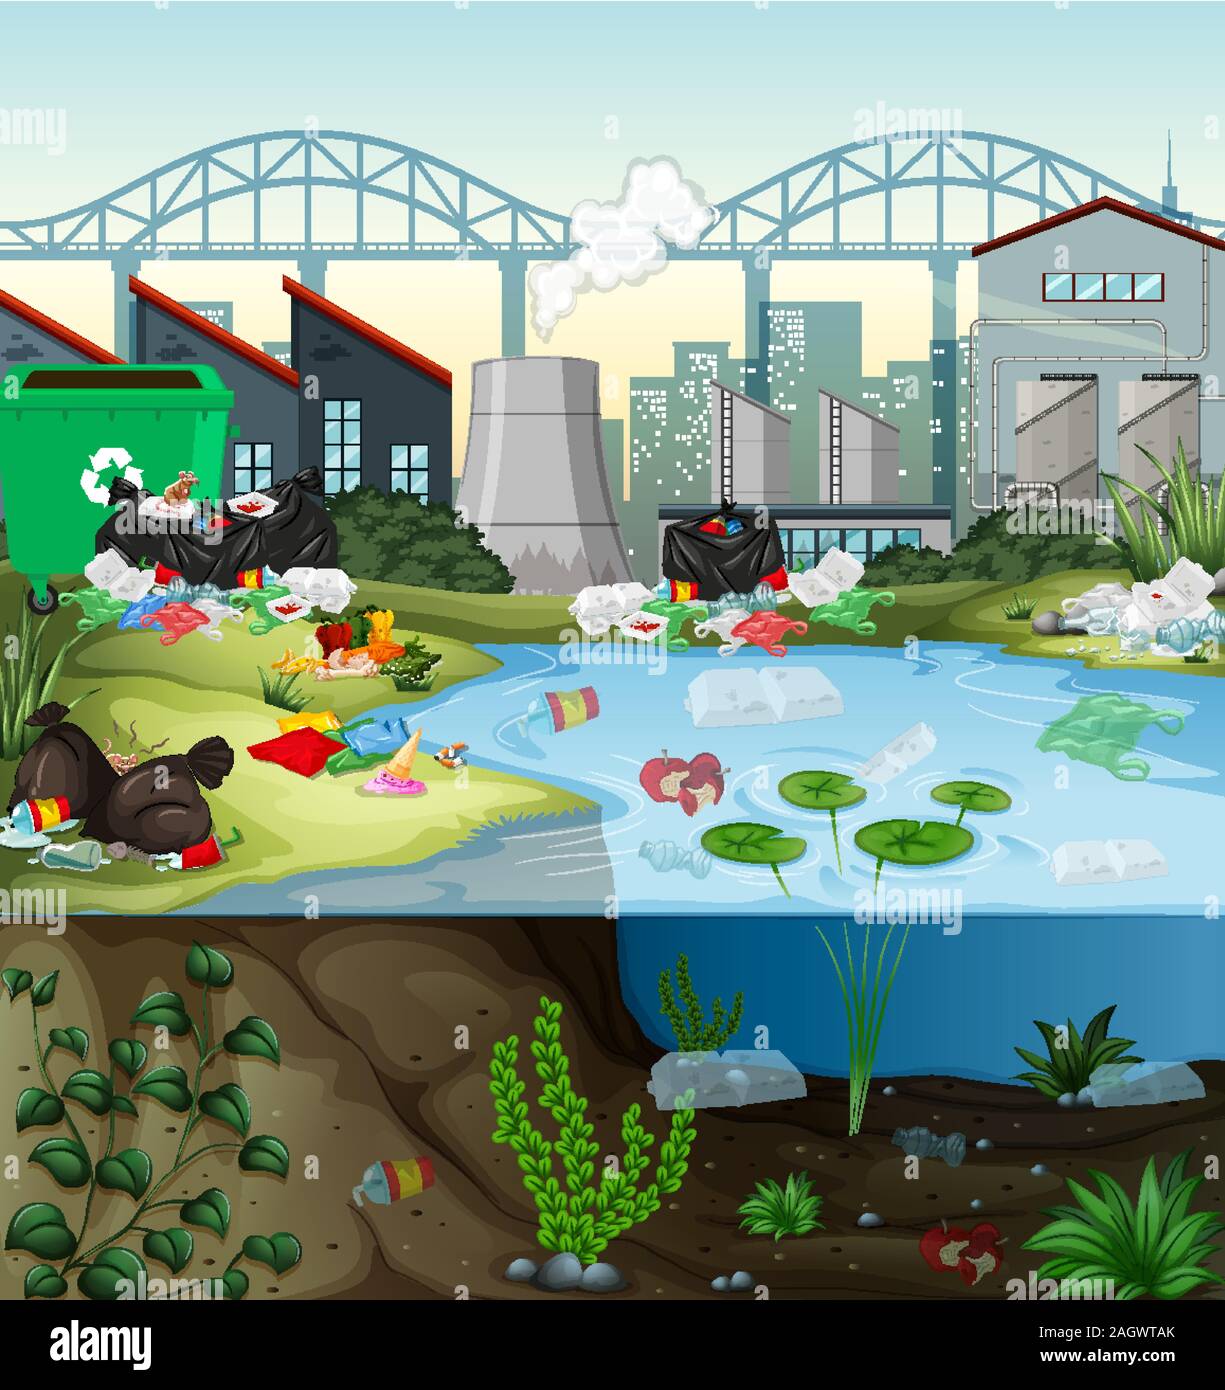 Water pollution with plastic bags in river illustration Stock Vector ...